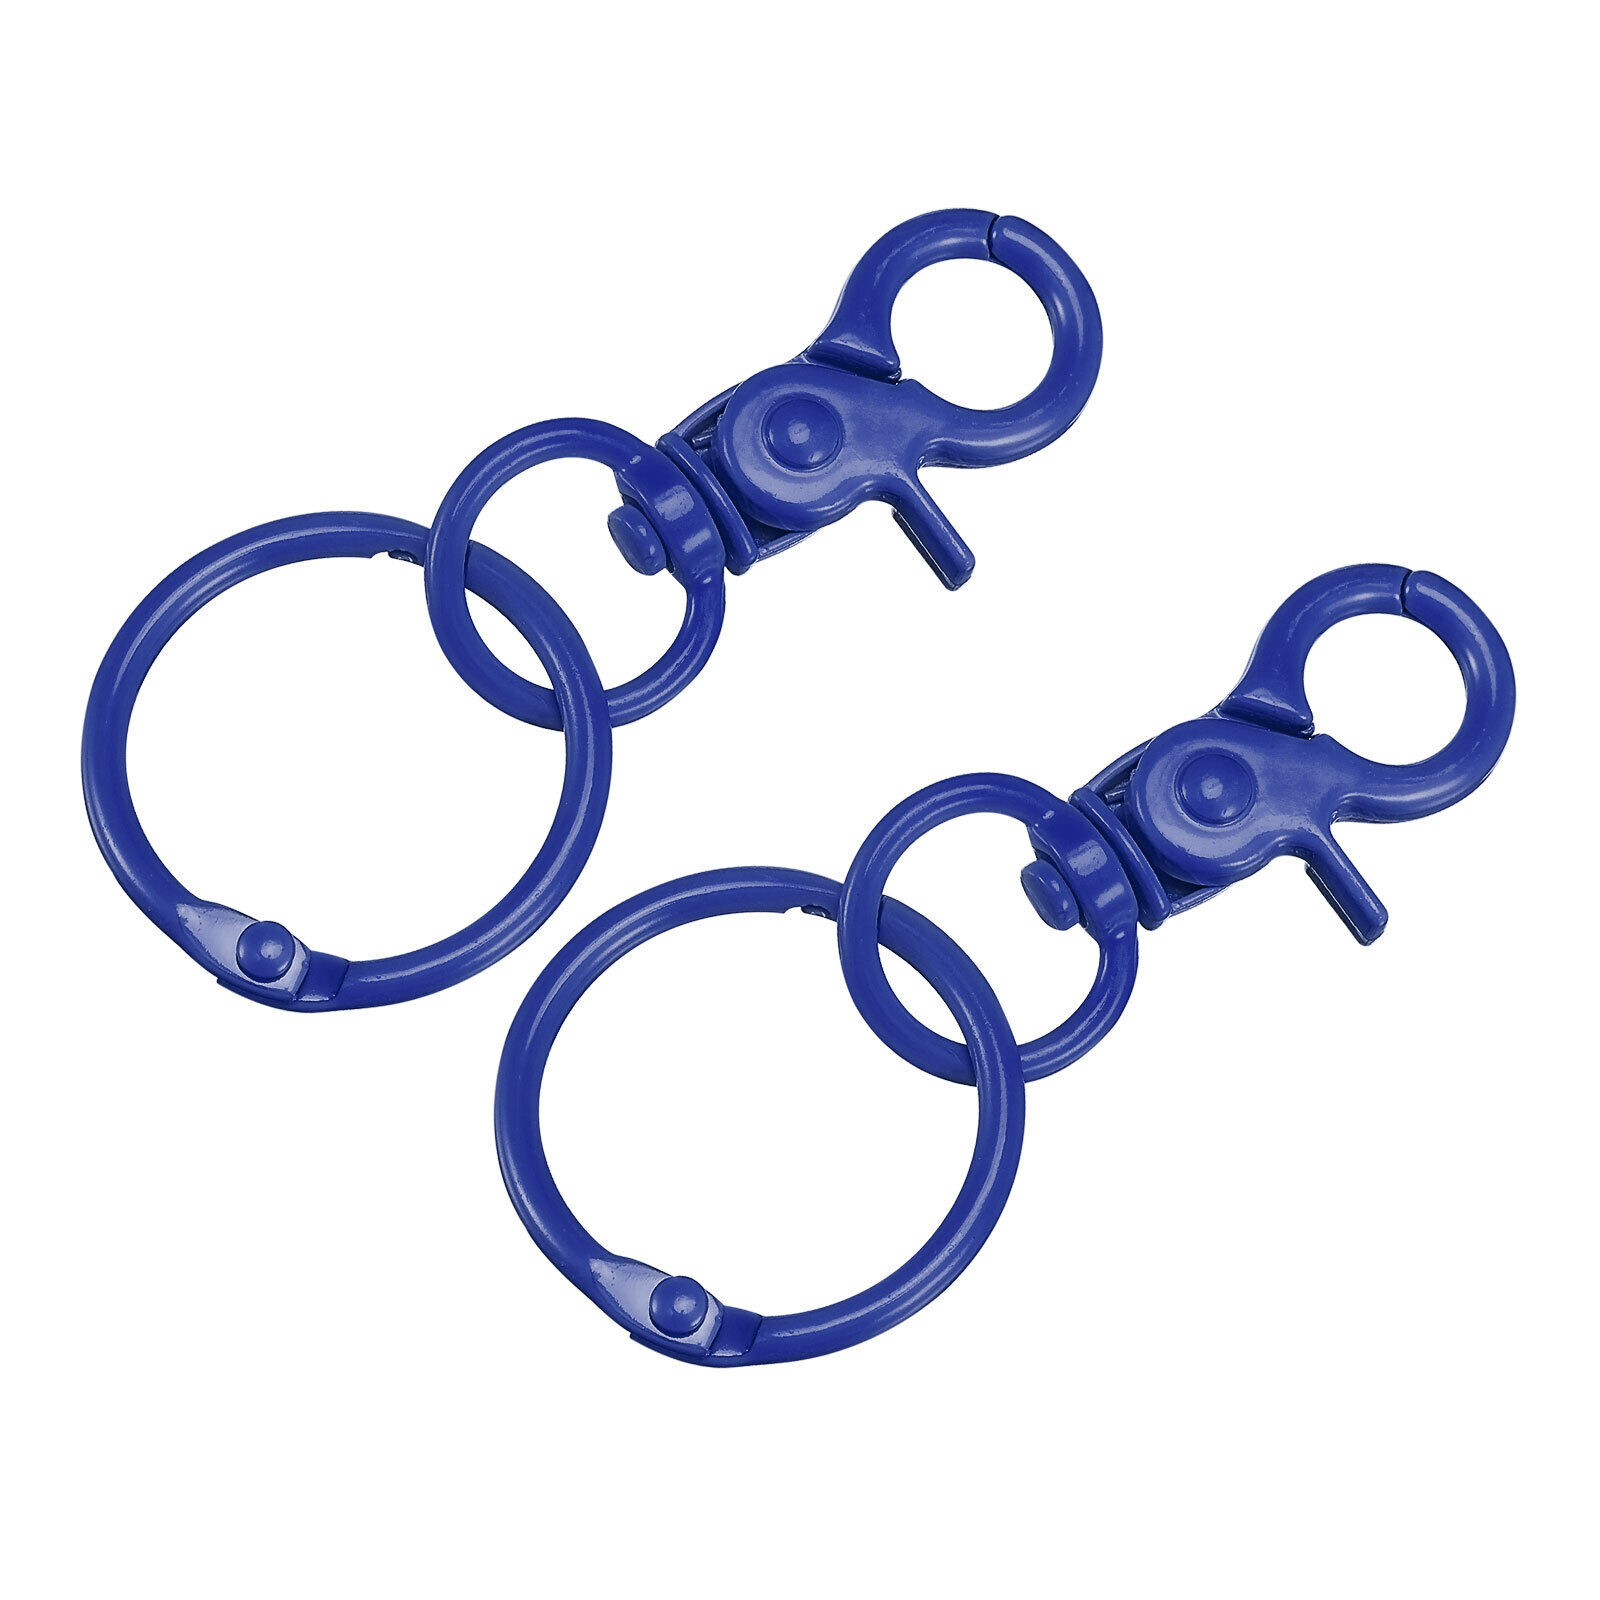 44mm Swivel Clasps Lanyard Snap Hook With Binder Ring For Diy Sapphire Blue 2pcs